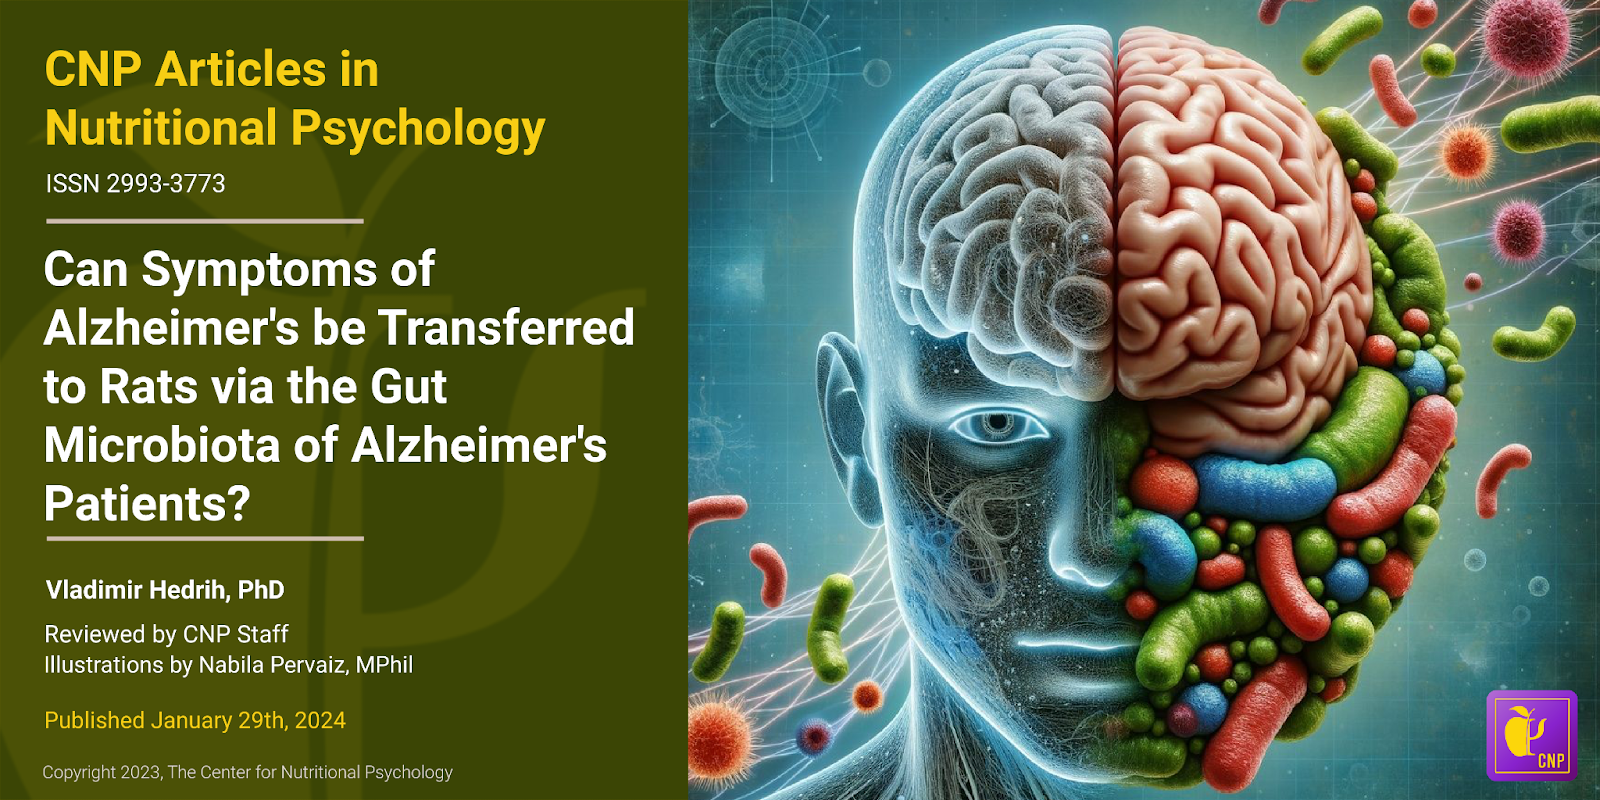 Can Symptoms of Alzheimer's be Transferred to Rats via the Gut Microbiota of Alzheimer's Patients